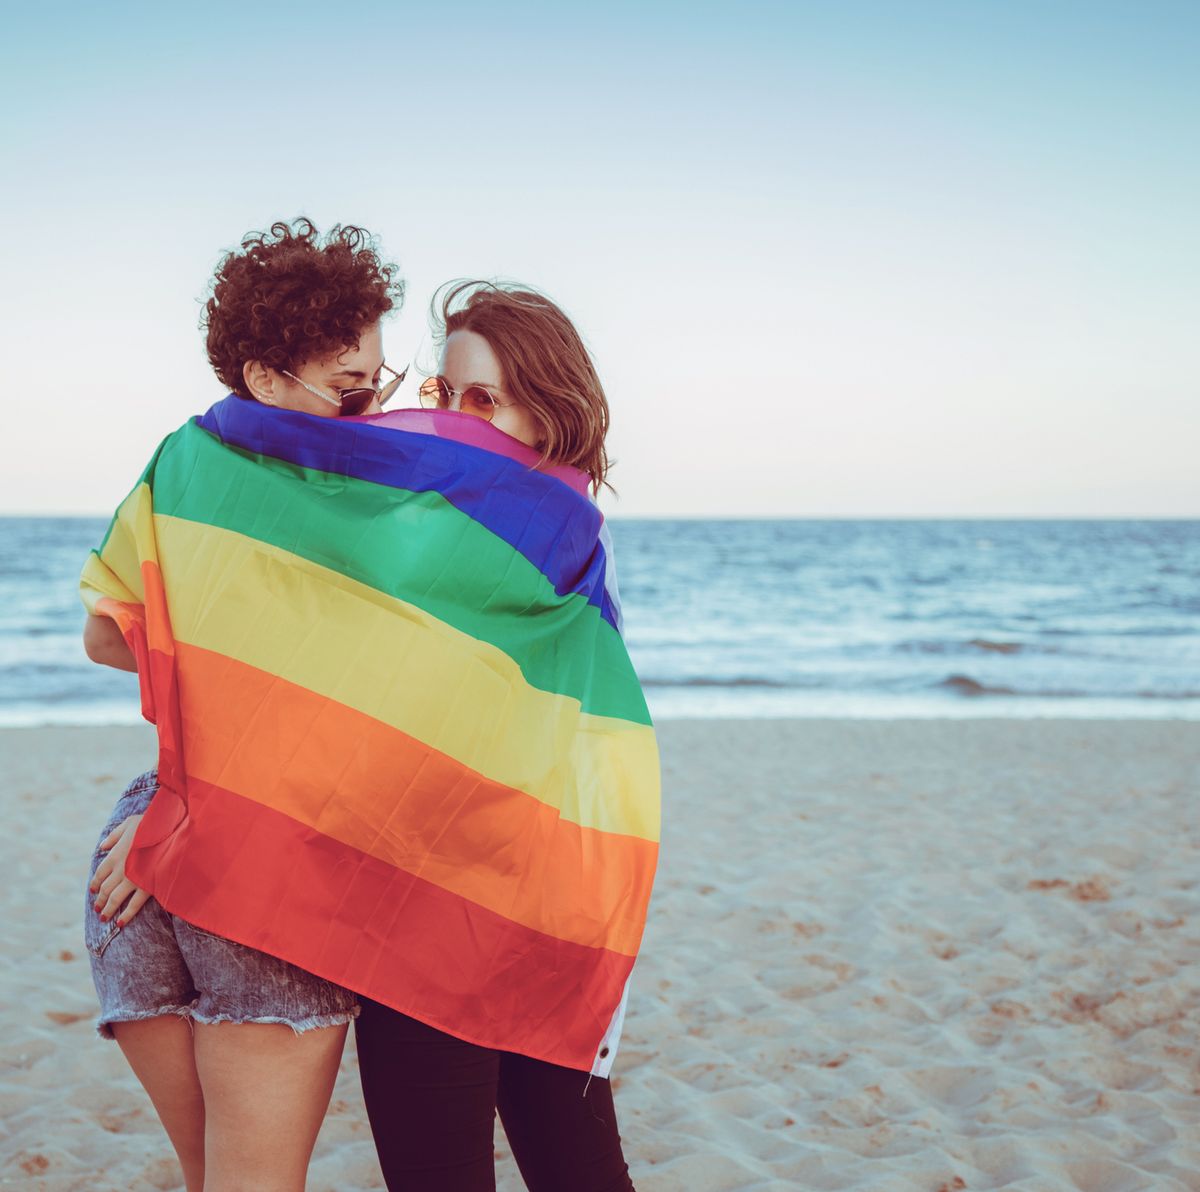 Nude Beach Sex Group - Am I Bisexual?' 10 Bisexuality Signs, According To Experts